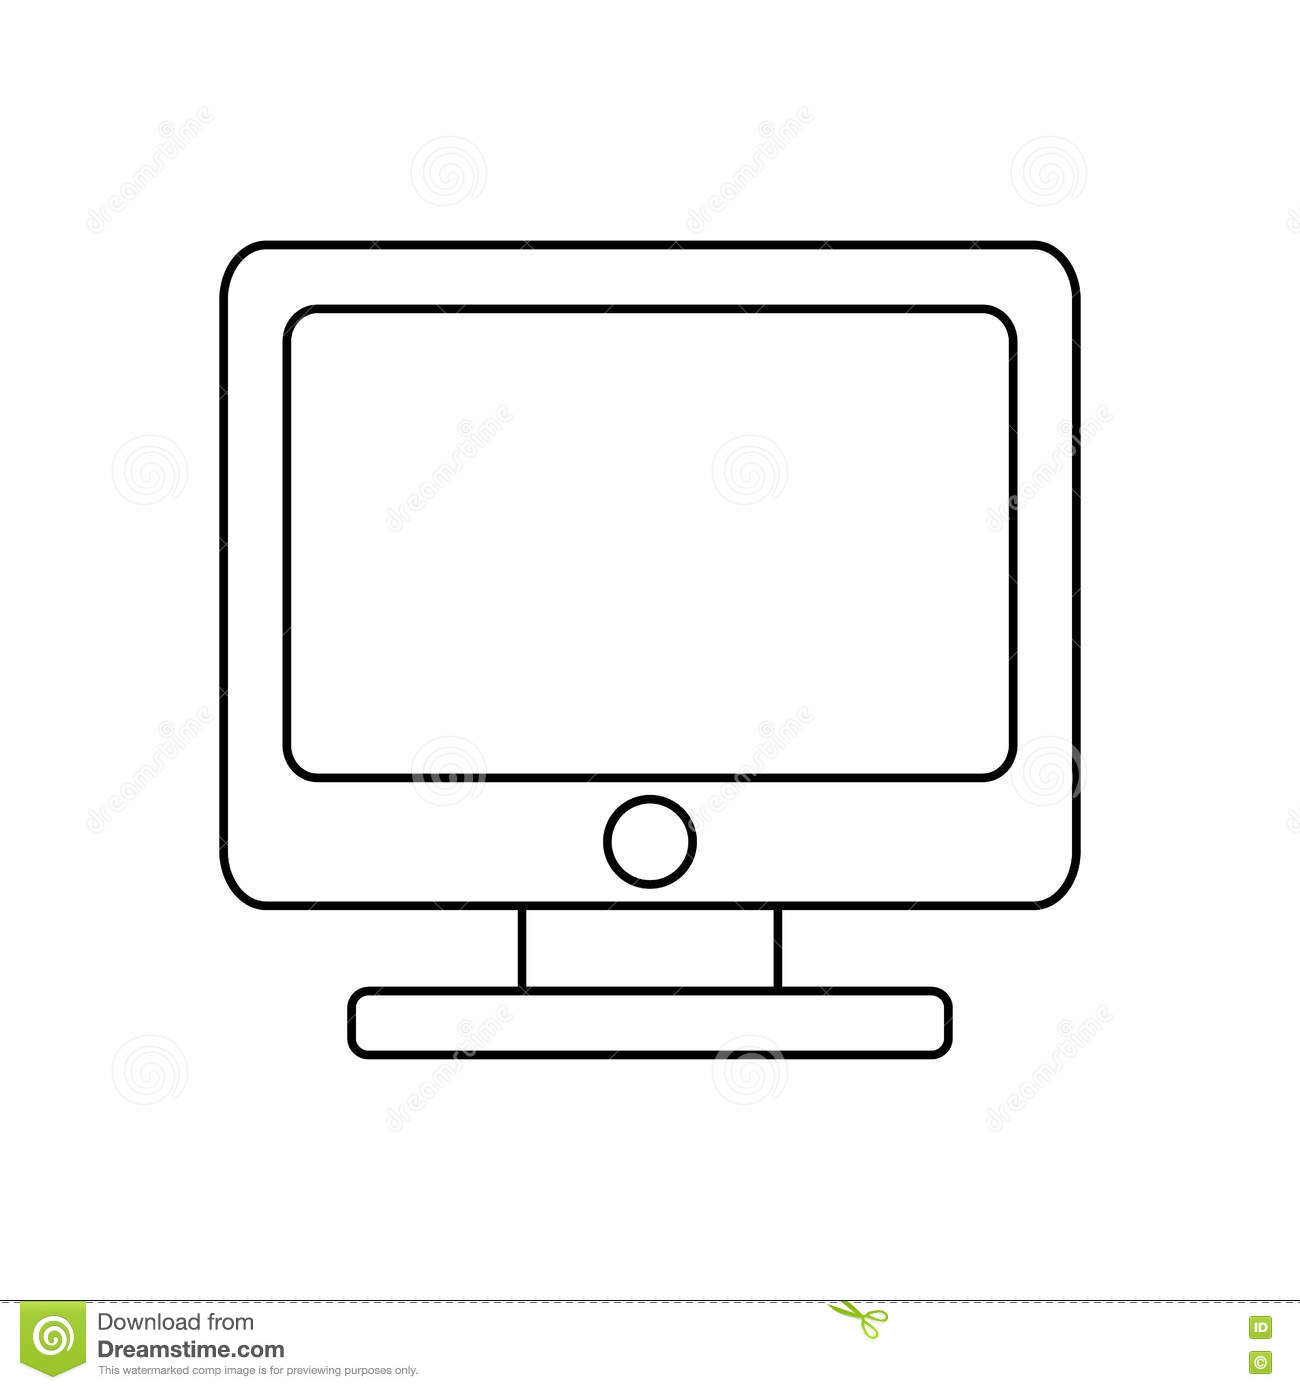 Computer outline clipart